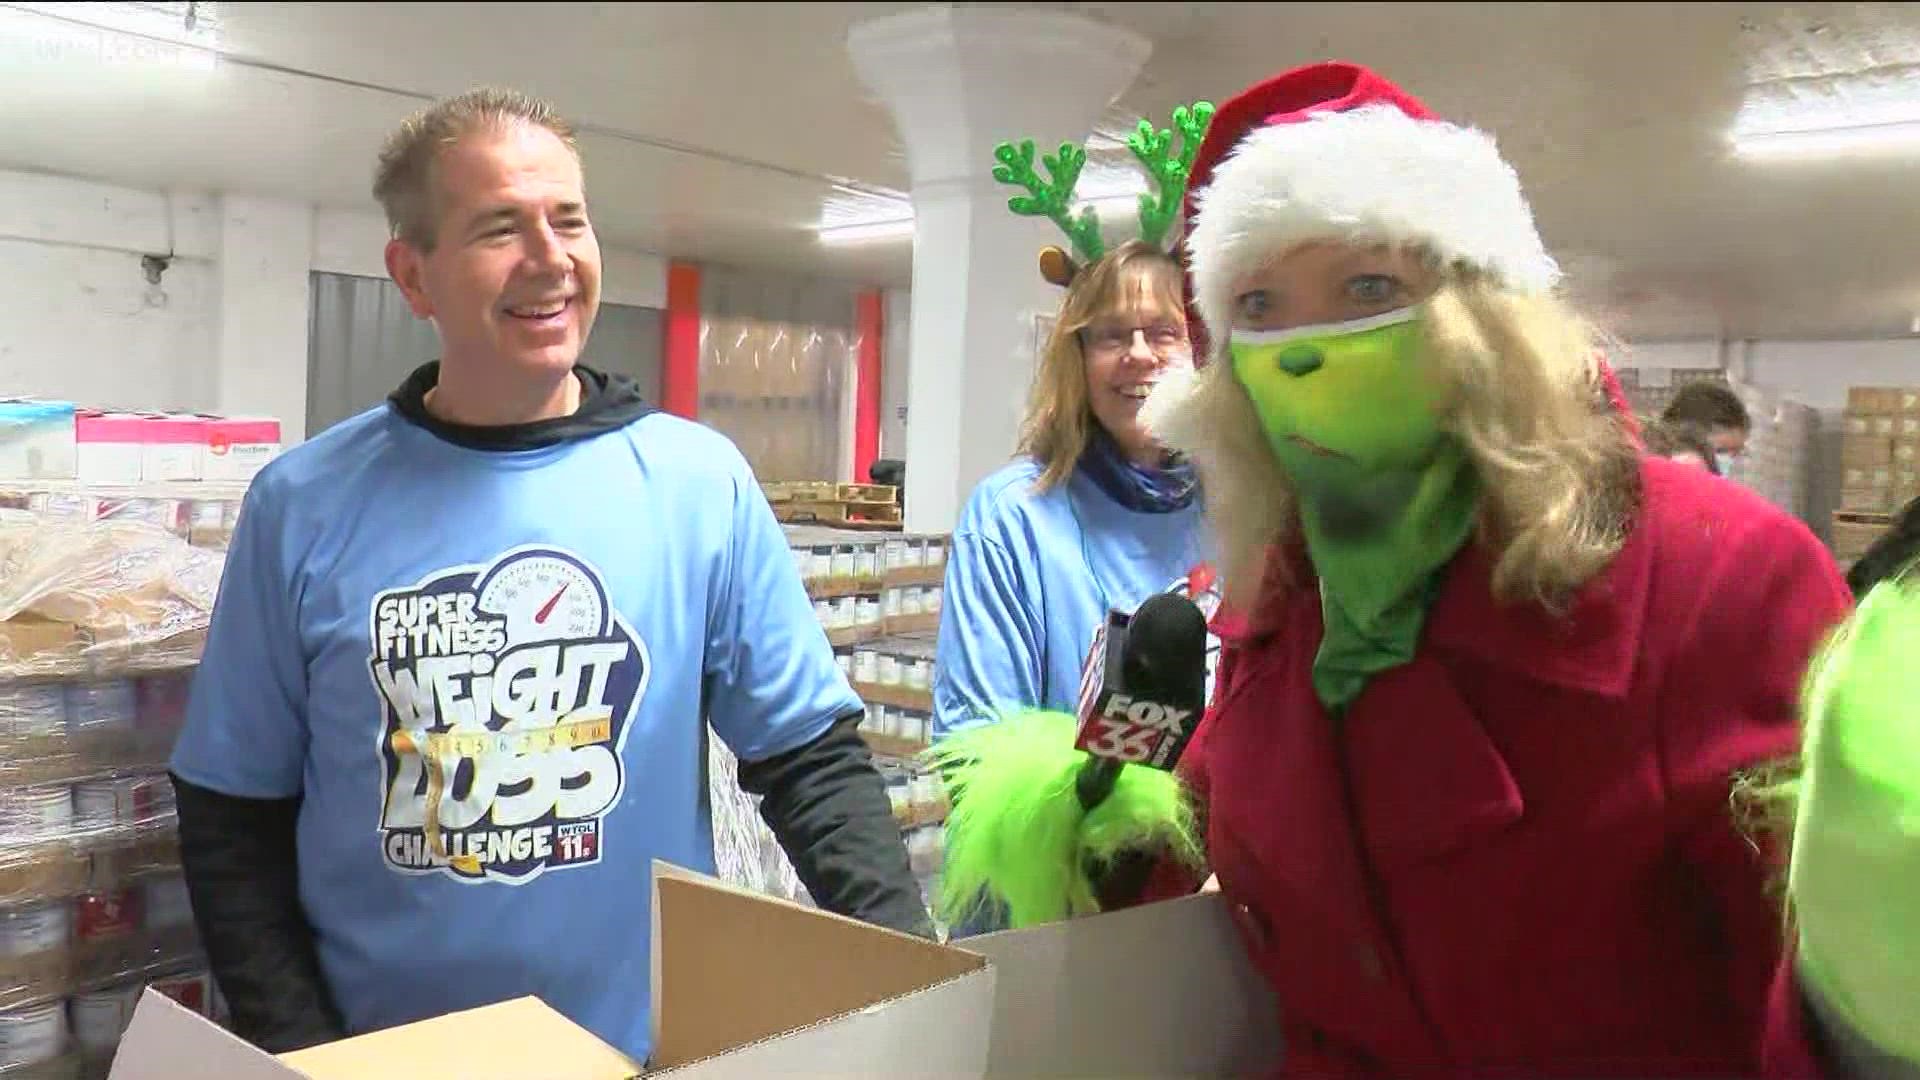 Super Fitness Weightloss Challenge the Christmas Case Race